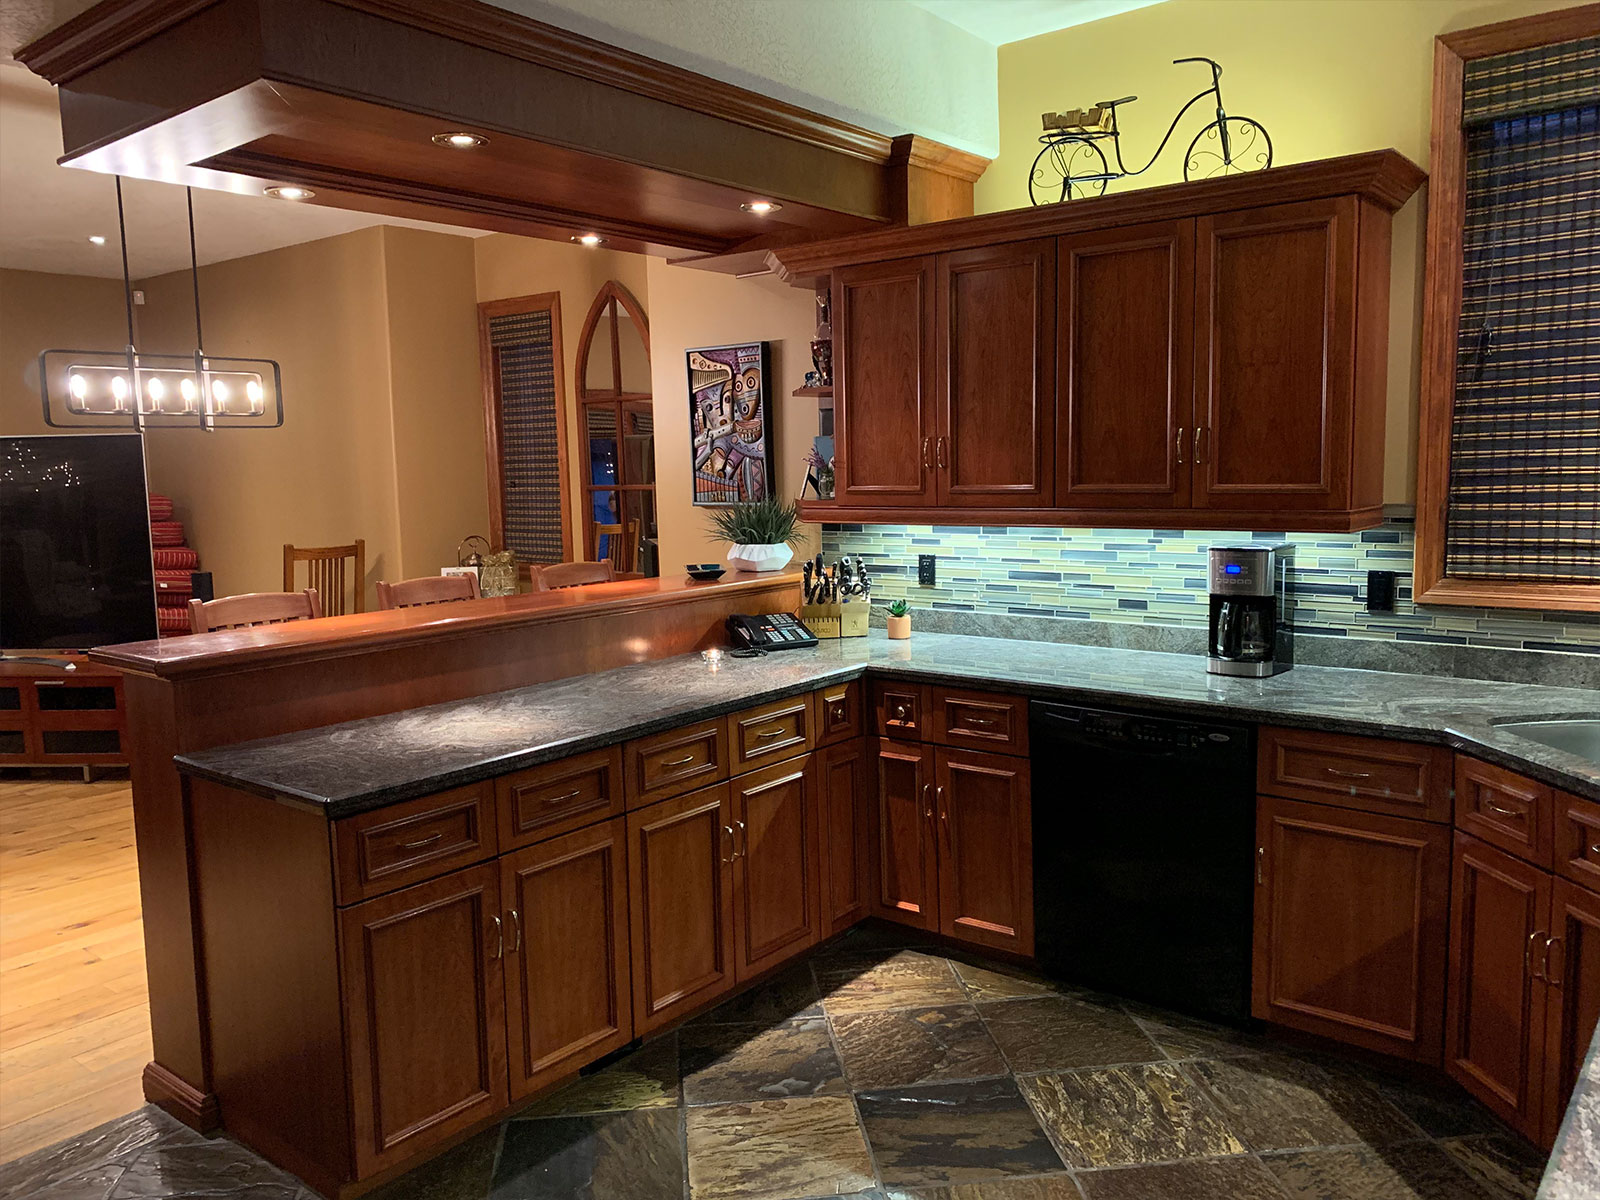 What Countertop Color Looks Best With Cherry Cabinets